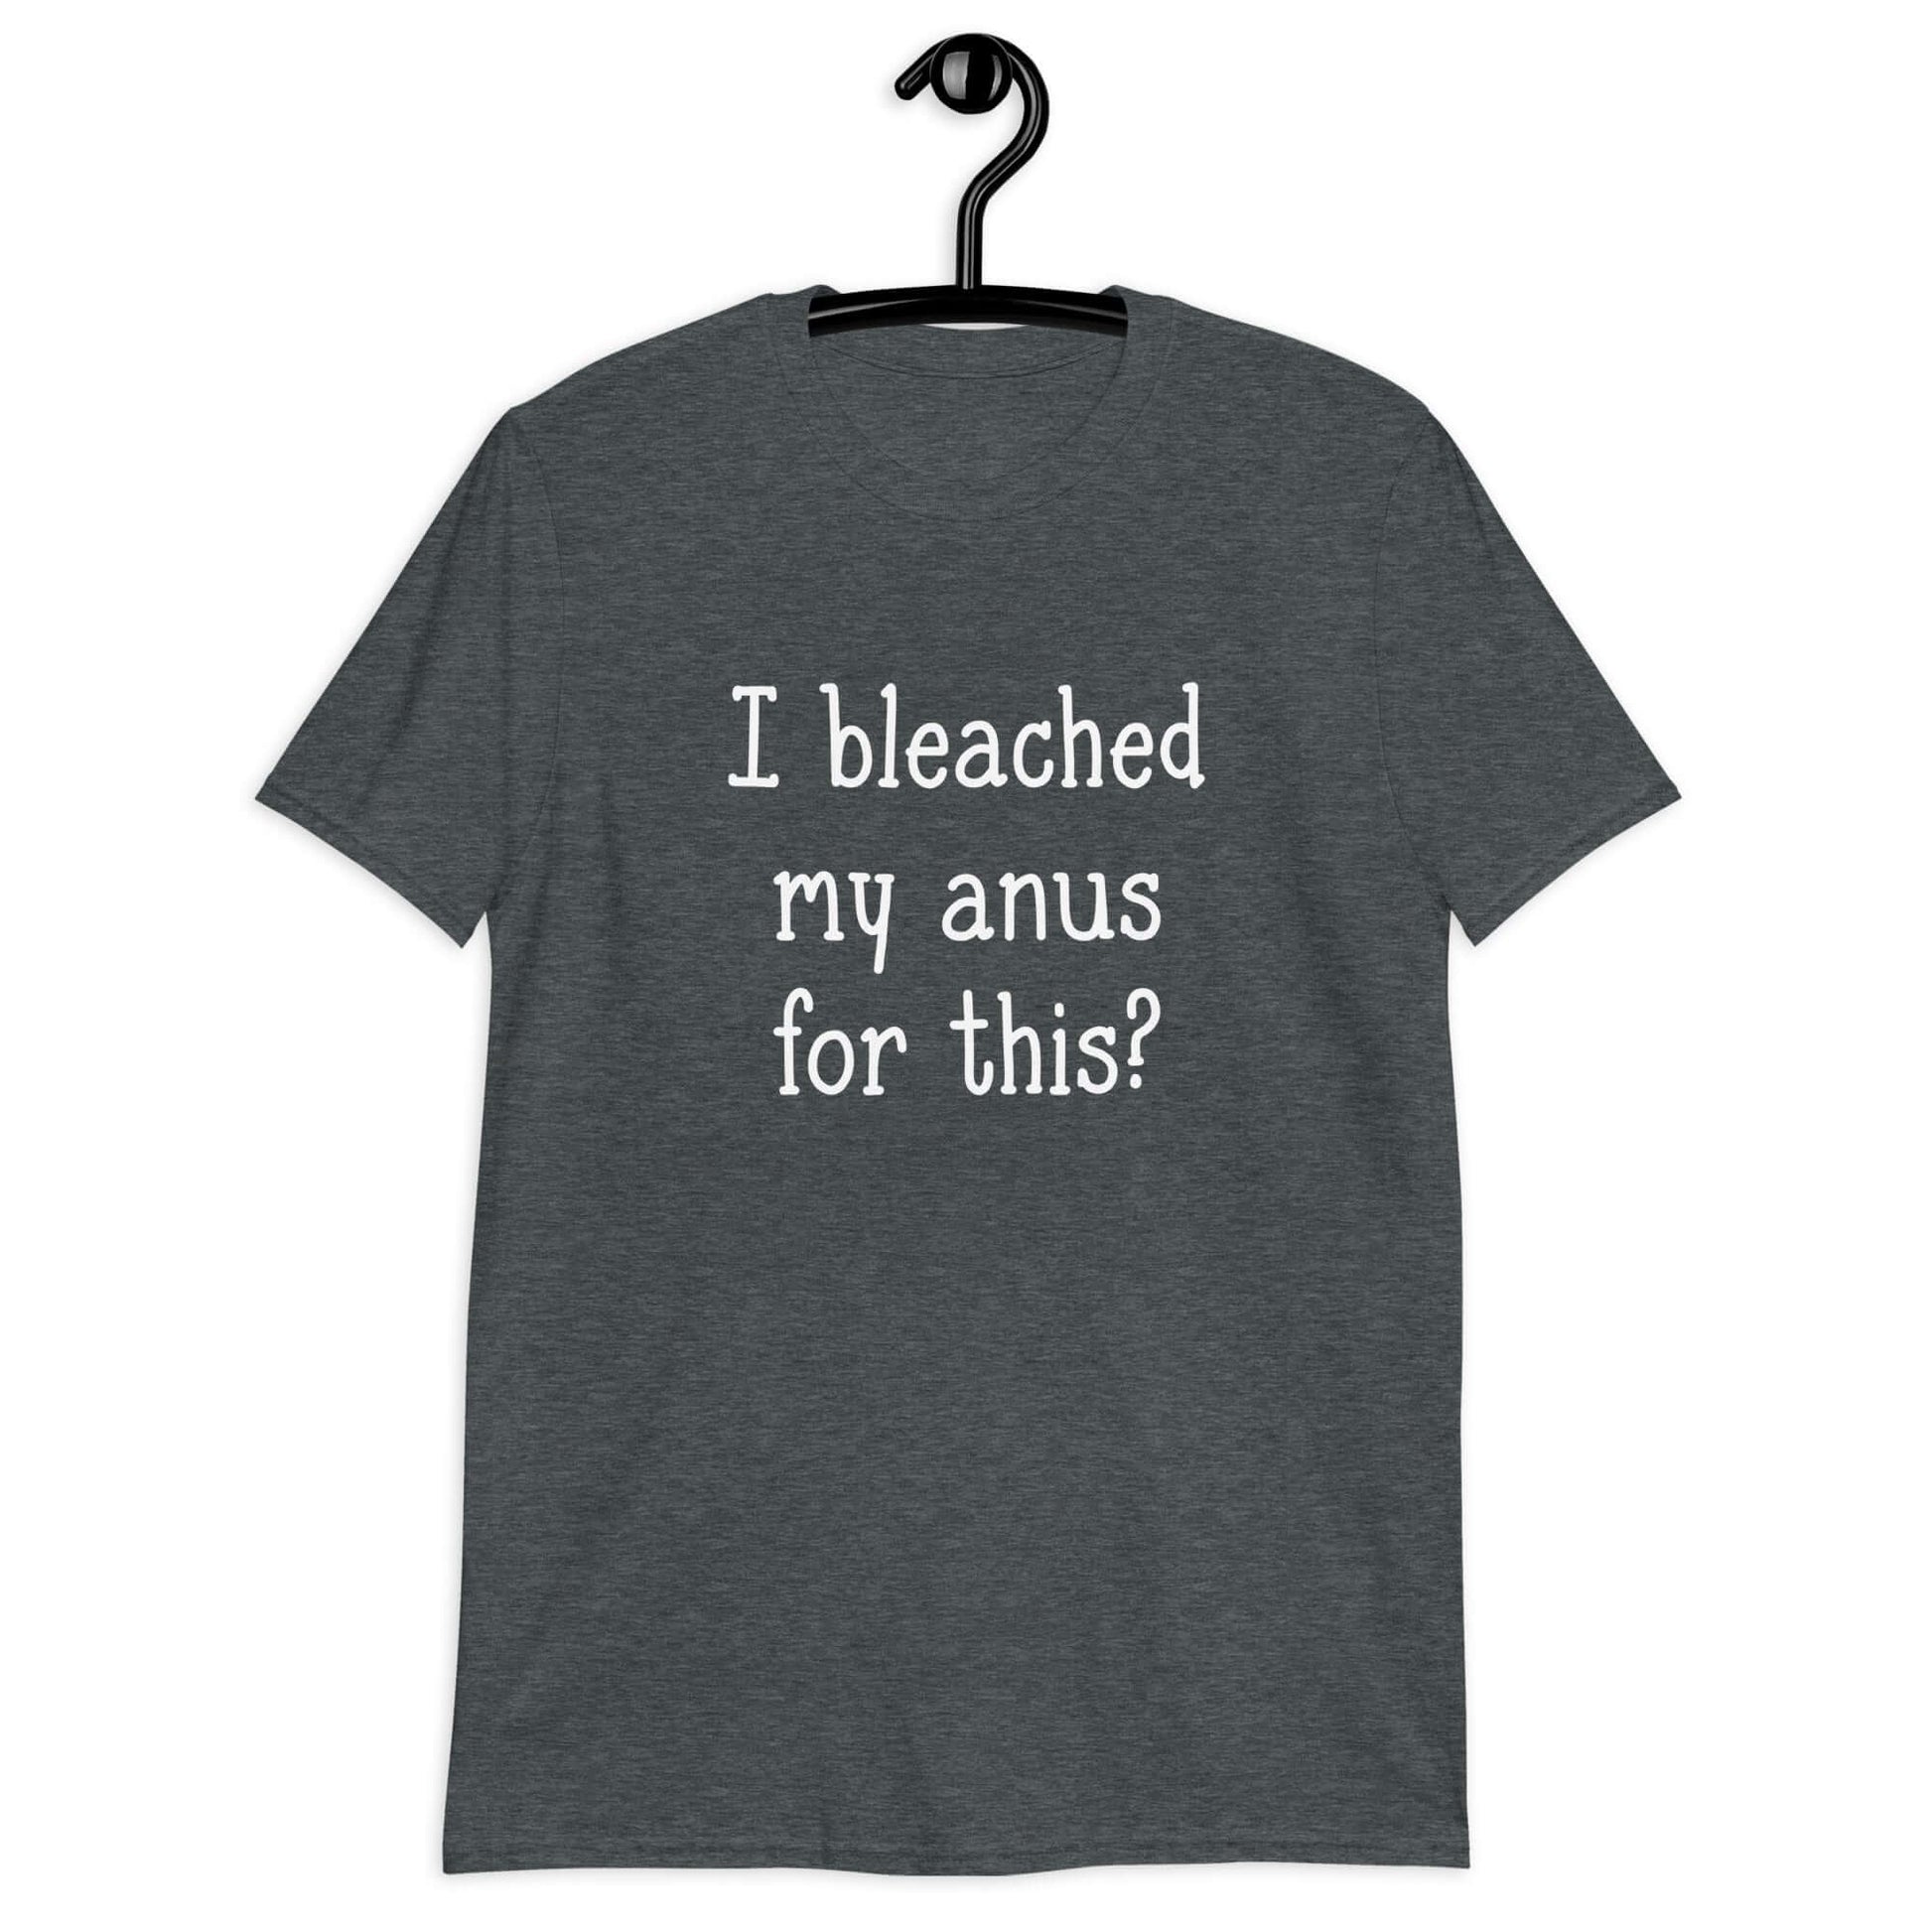 dark heather t-shirt that has "I bleached my anus for this?" printed on the front